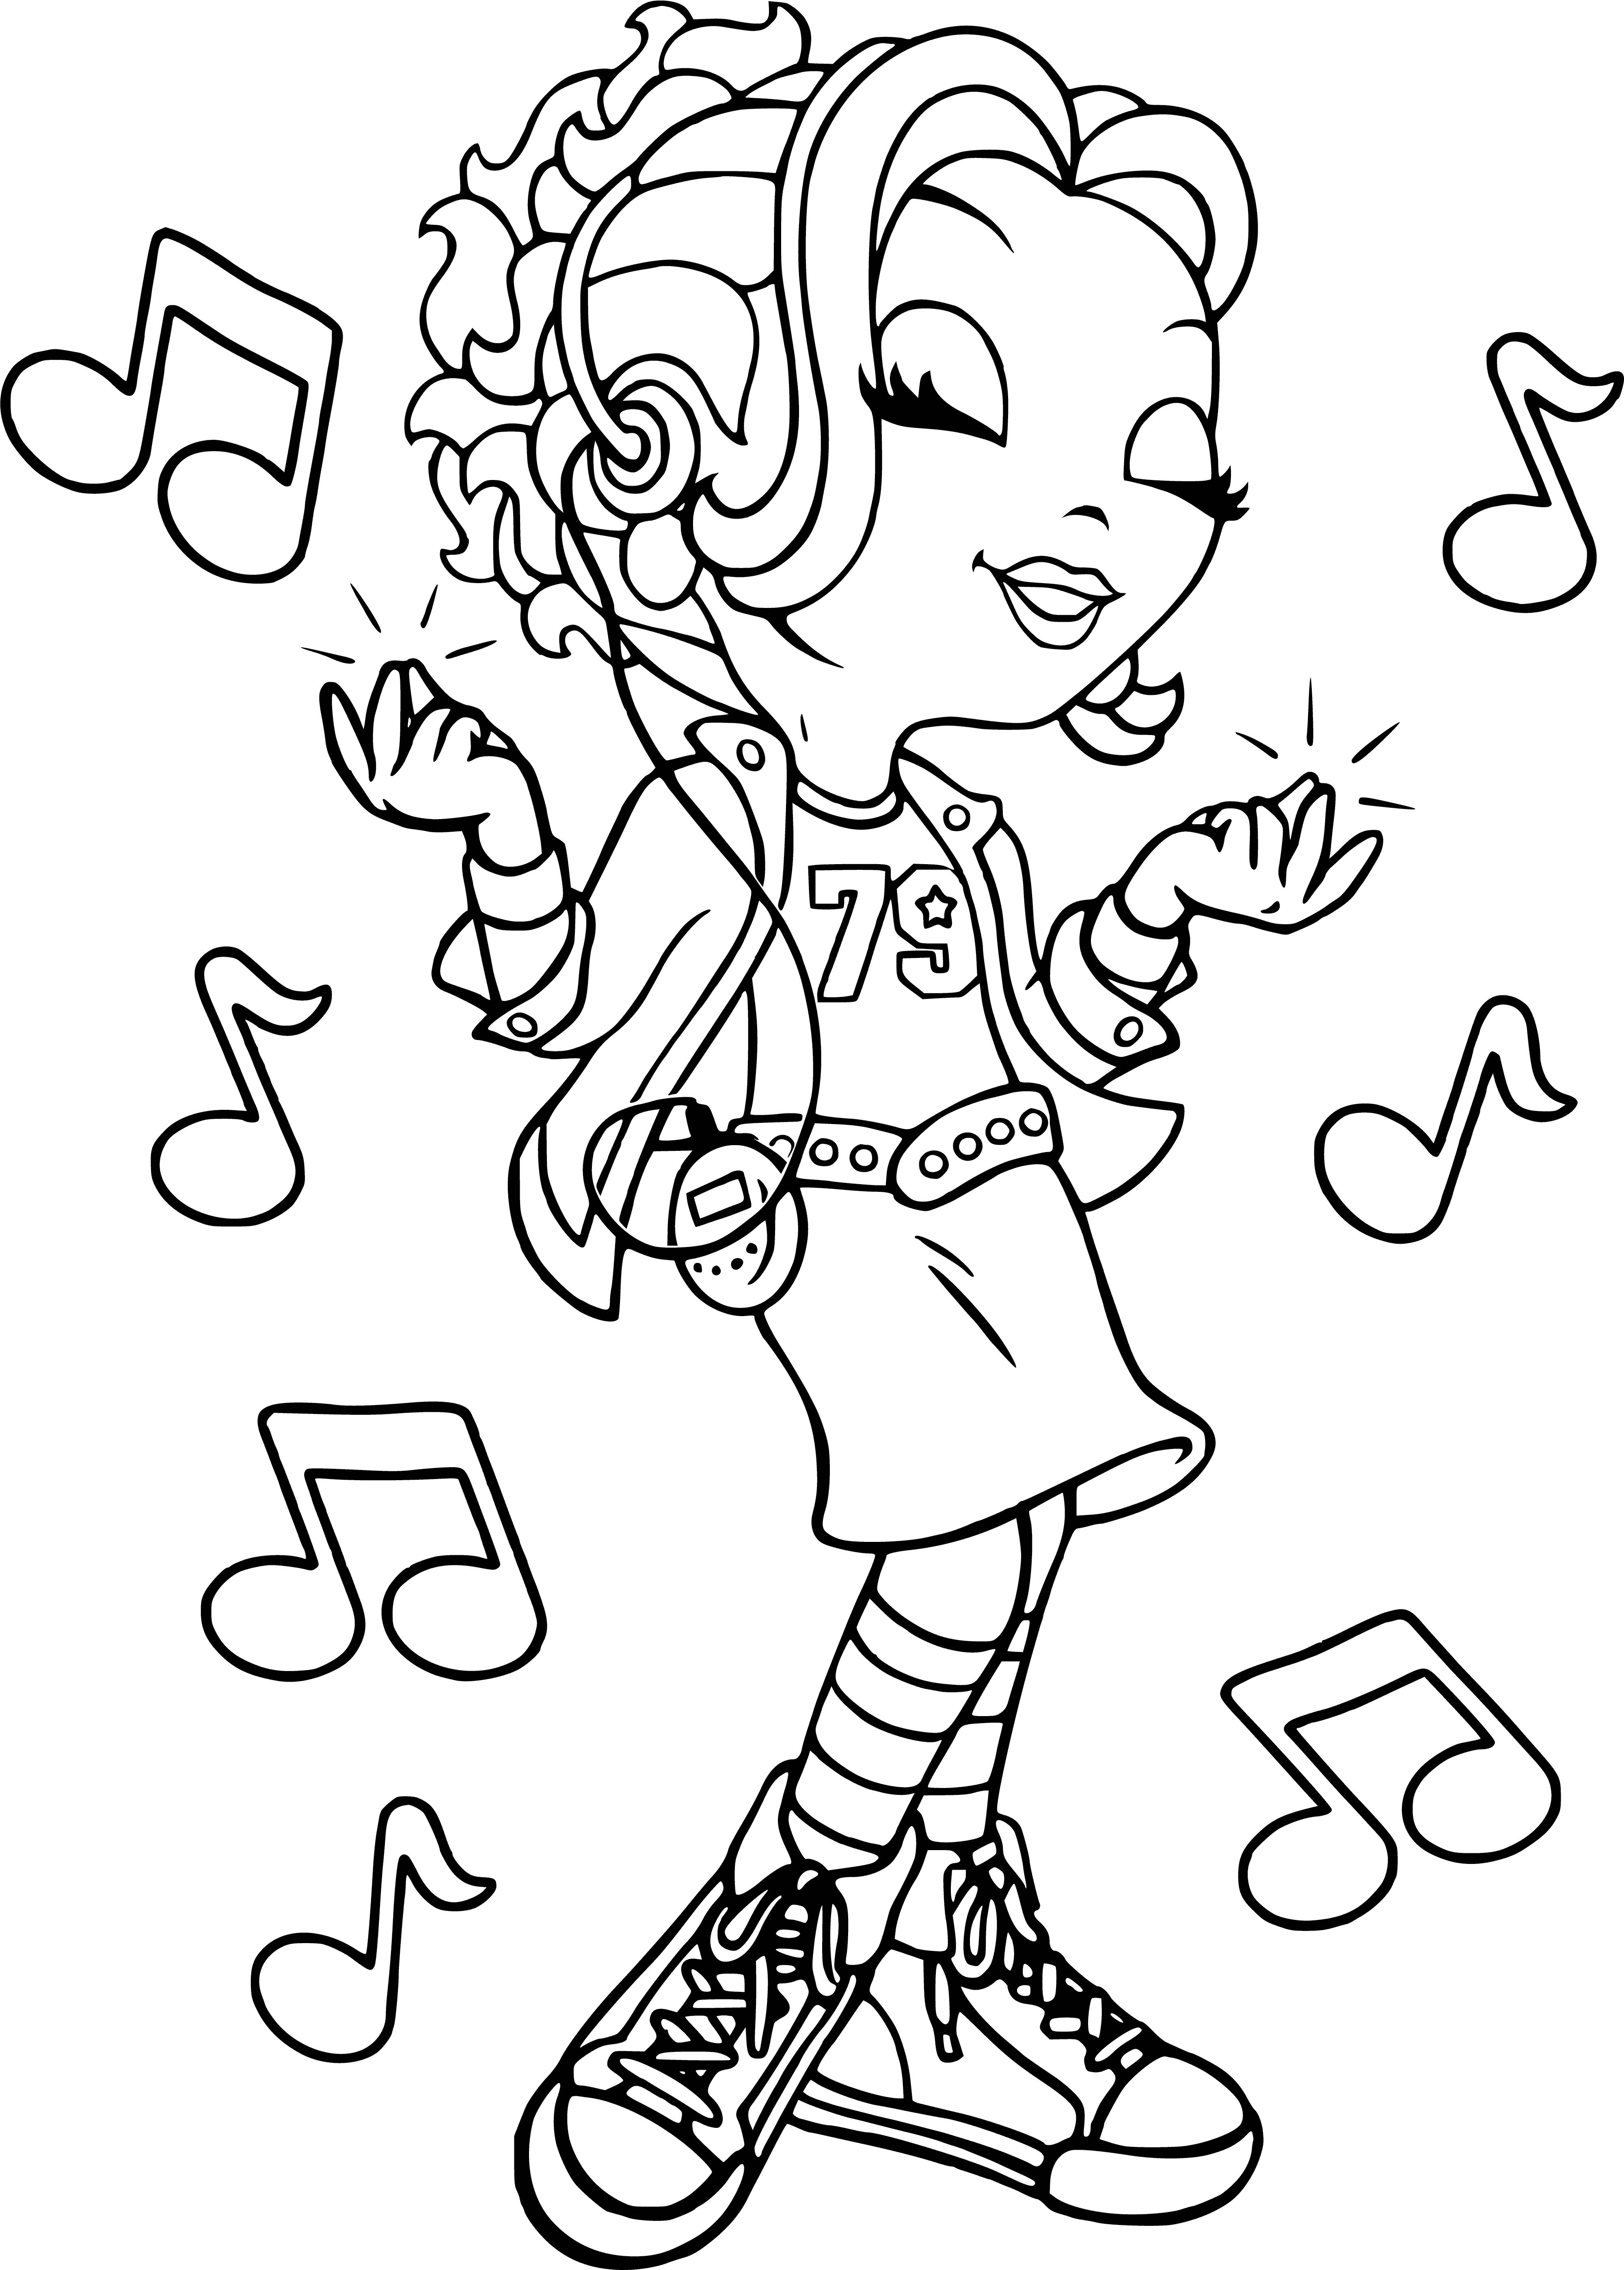 coloring page: Girl in pink dress with polka dots, ribbon, purse looking at herself in mirror.